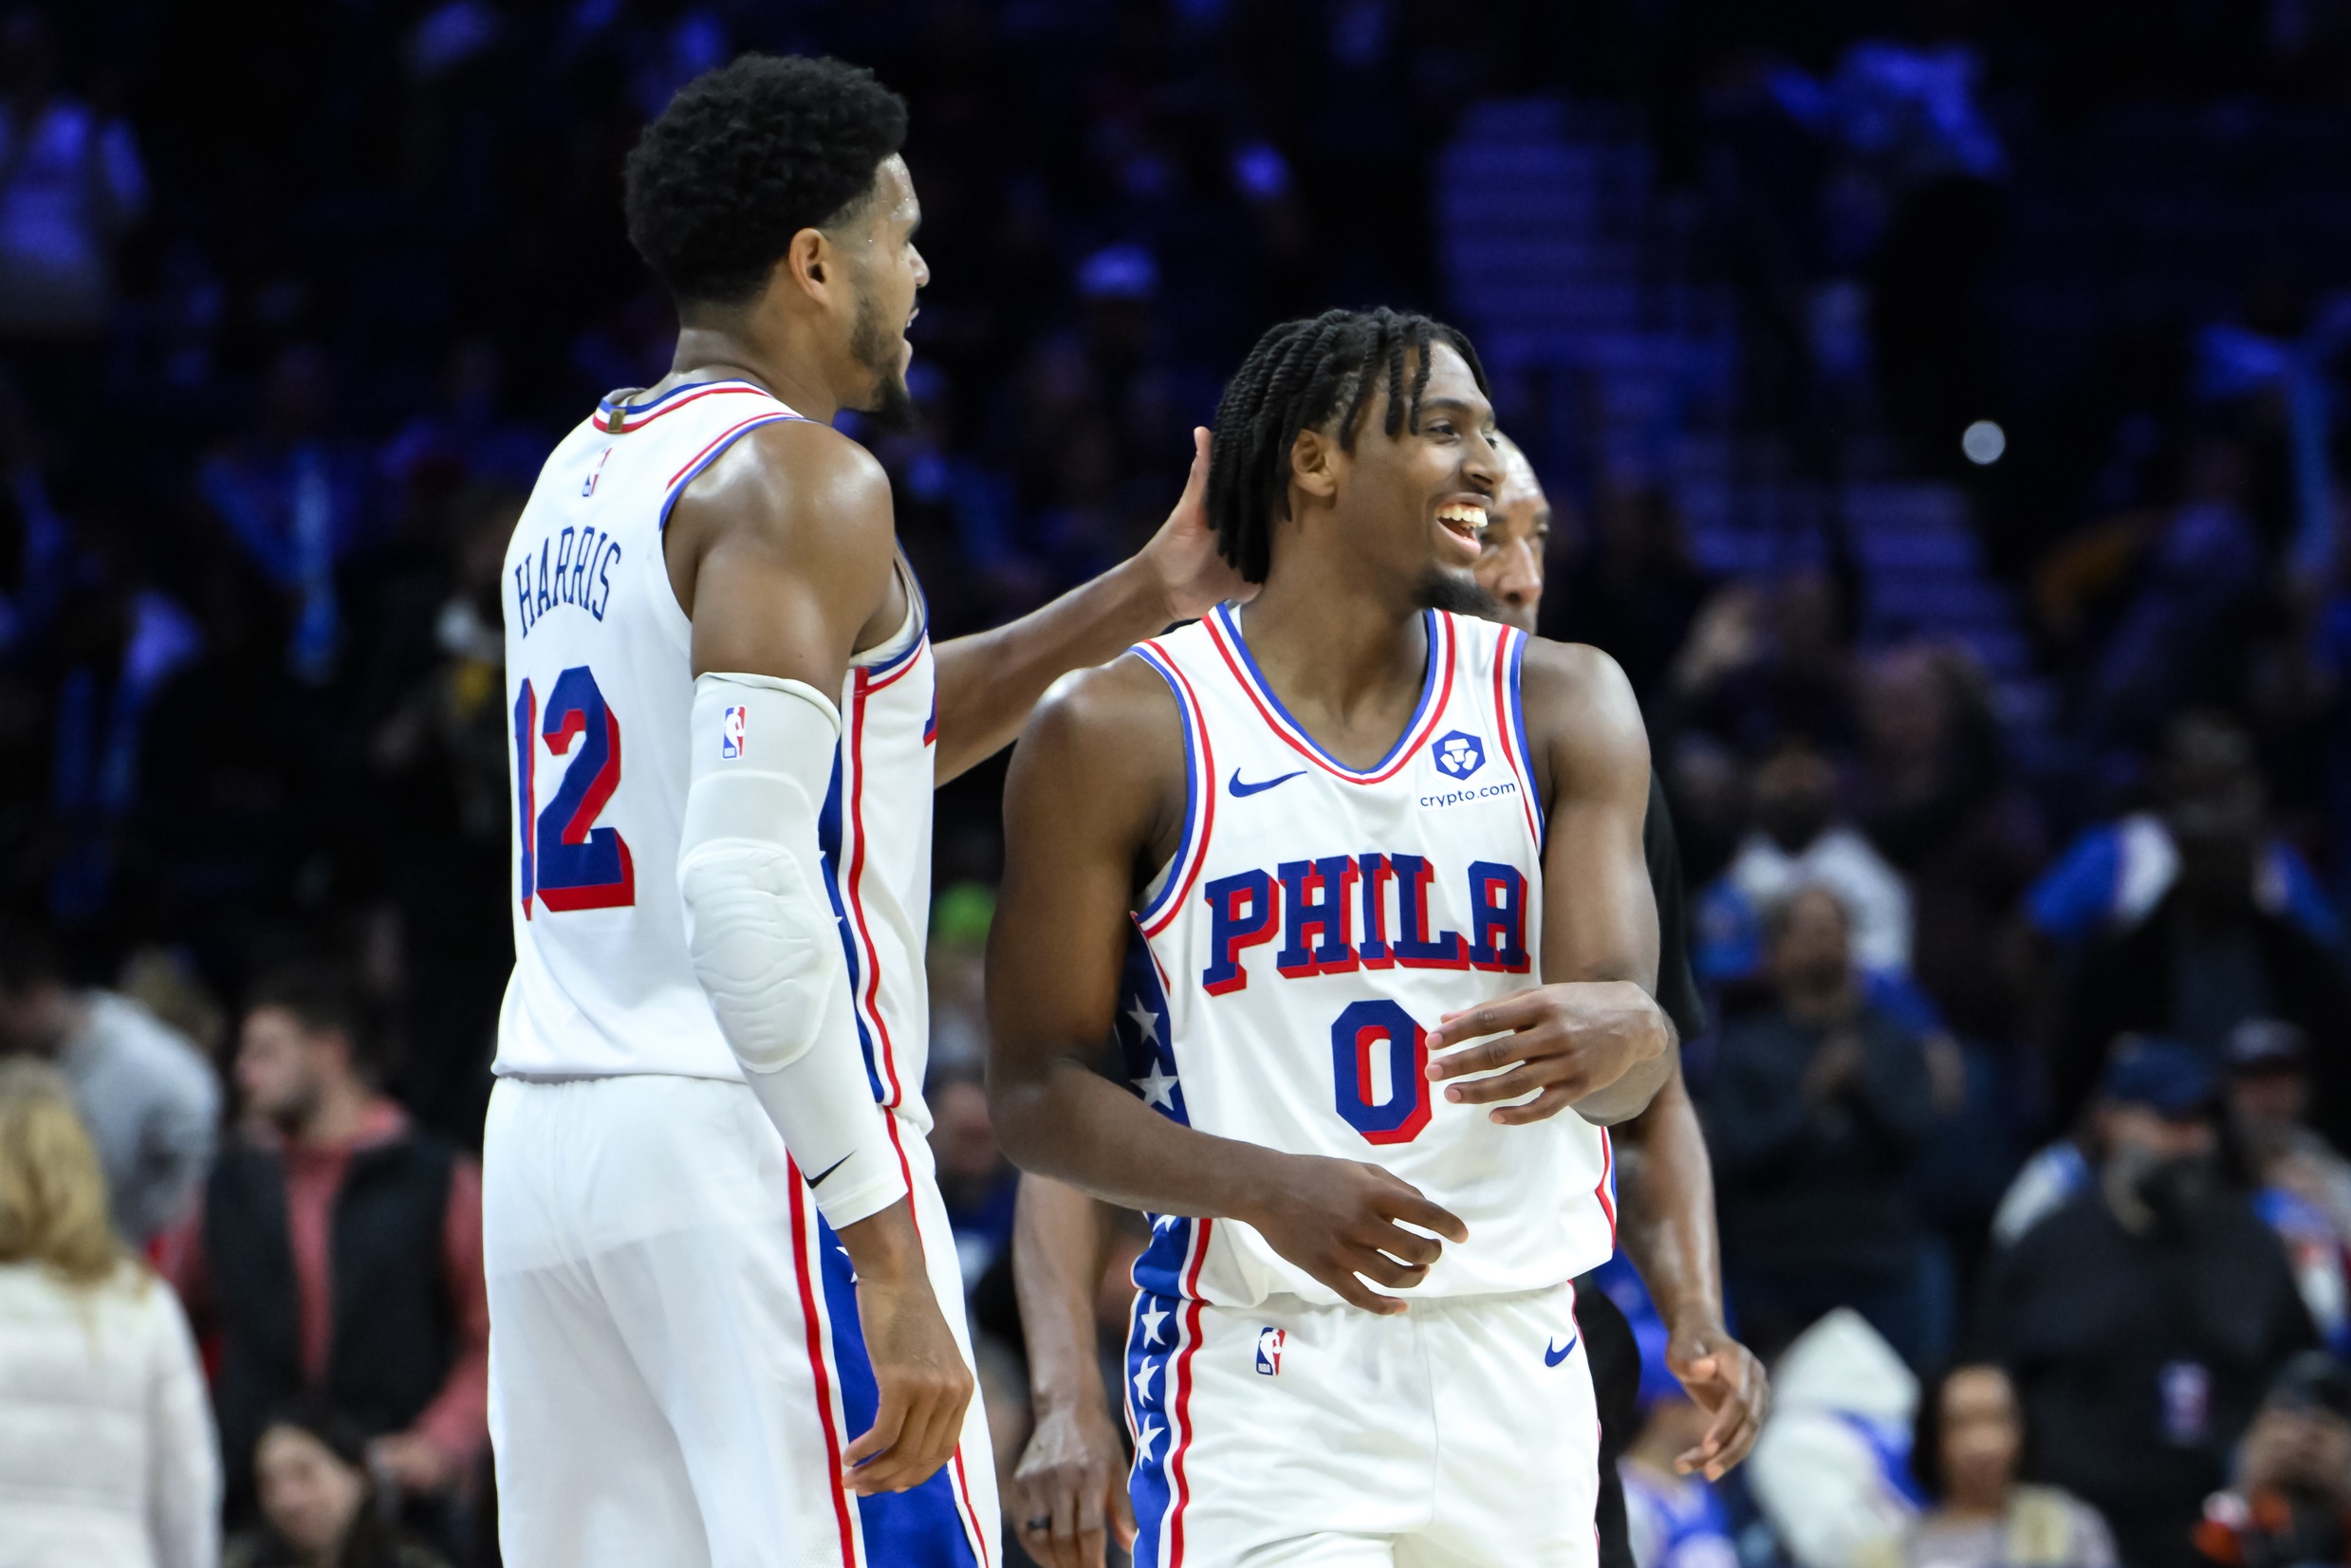 Philadelphia 76ers guard Tyrese Maxey (0) is greeted by Philadelphia 76ers forward Tobias Harris (12) after a 50 point performance against the Indiana Pacers at Wells Fargo Center.